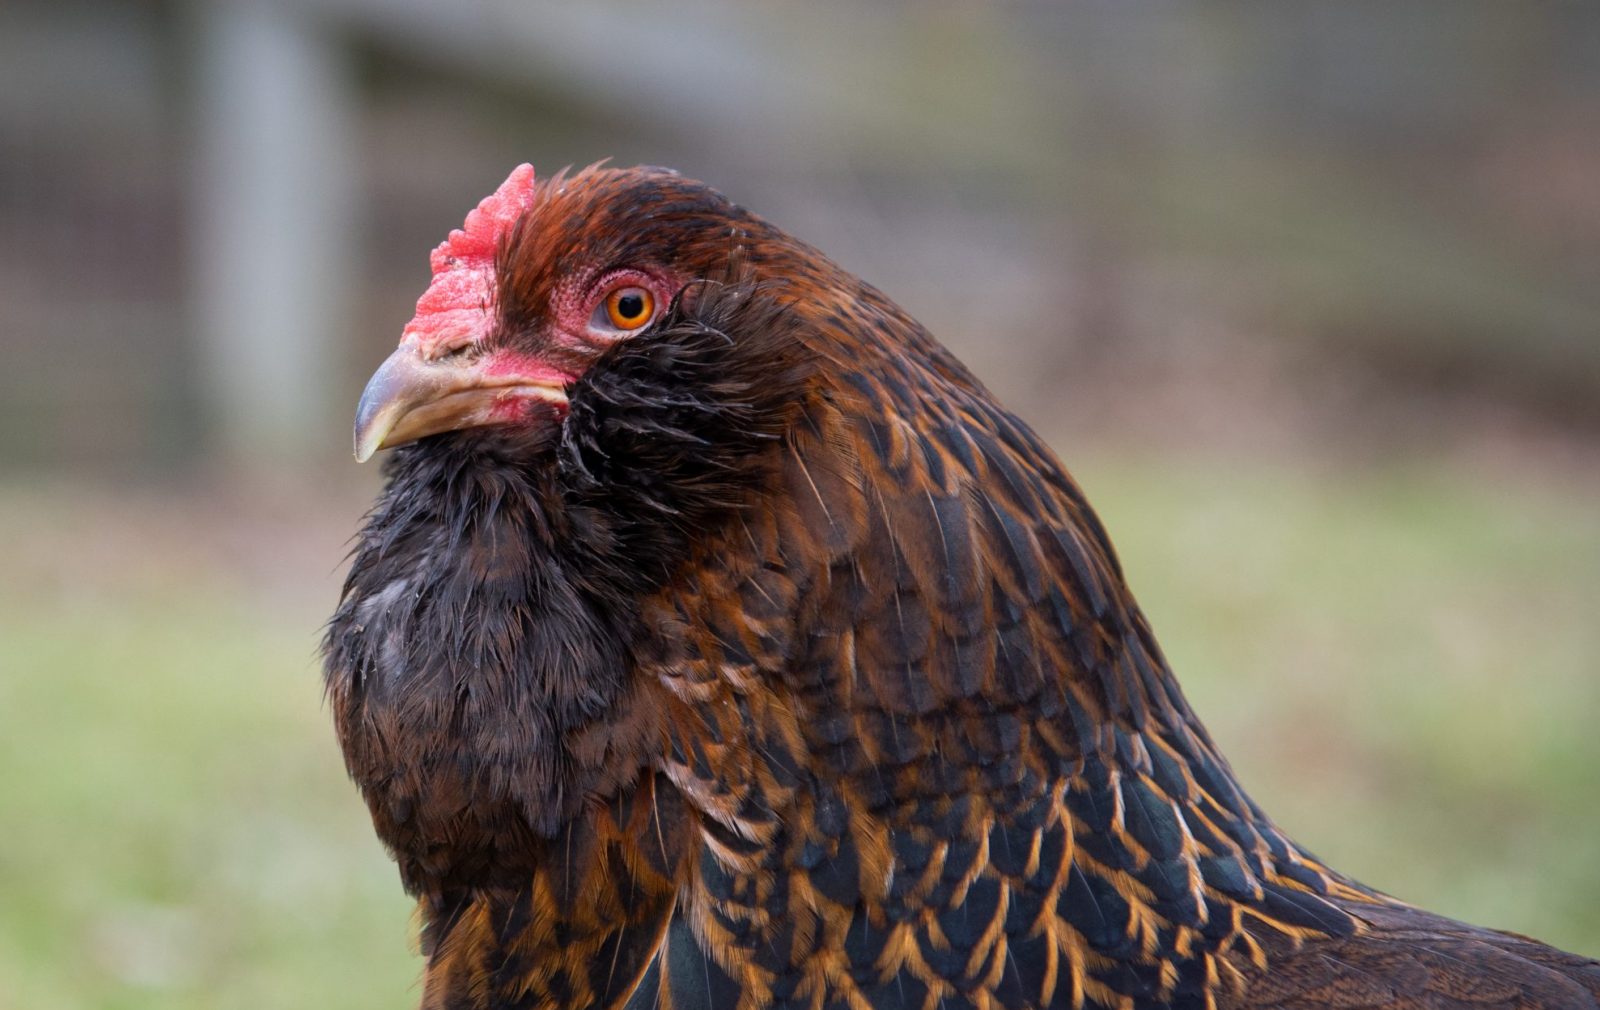 Beeley Pippin hen at Farm Sanctuary